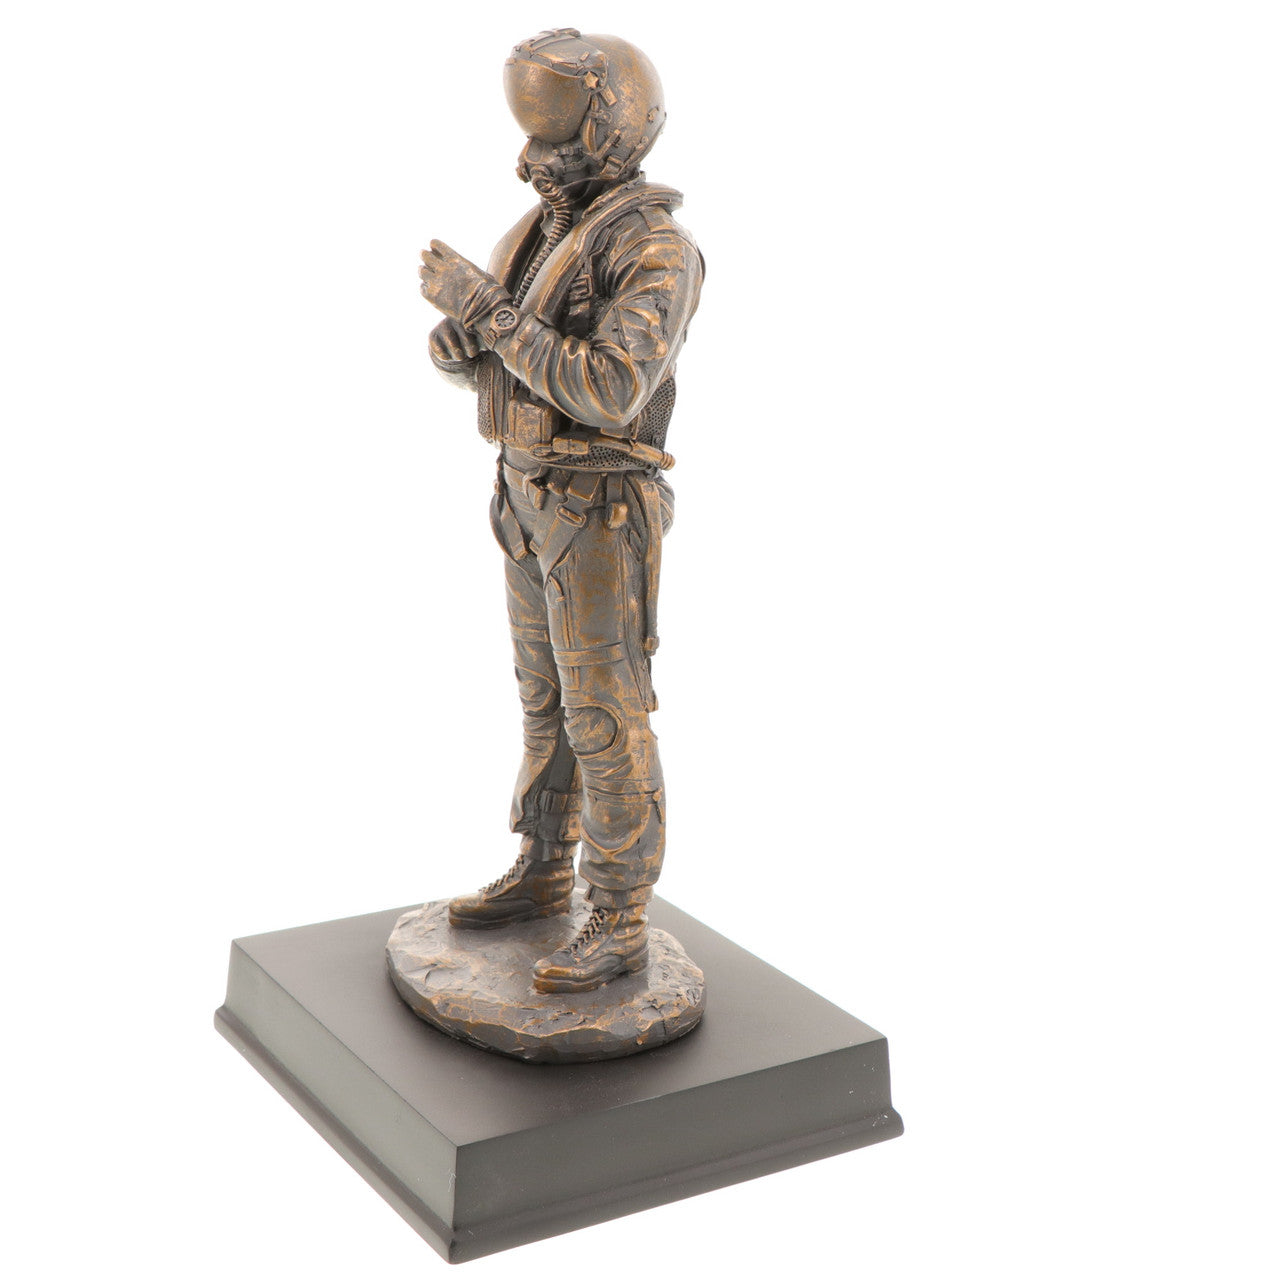 The limited edition RAAF Aviator Figurine is a stunning depiction of a Royal Australian Air Force aviator ready for flight. Crafted with meticulous attention to detail, this cold-cast bronze figurine captures the essence of the RAAF's expertise and dedication to maintaining Australia's air power. www.defenceqstore.com.au